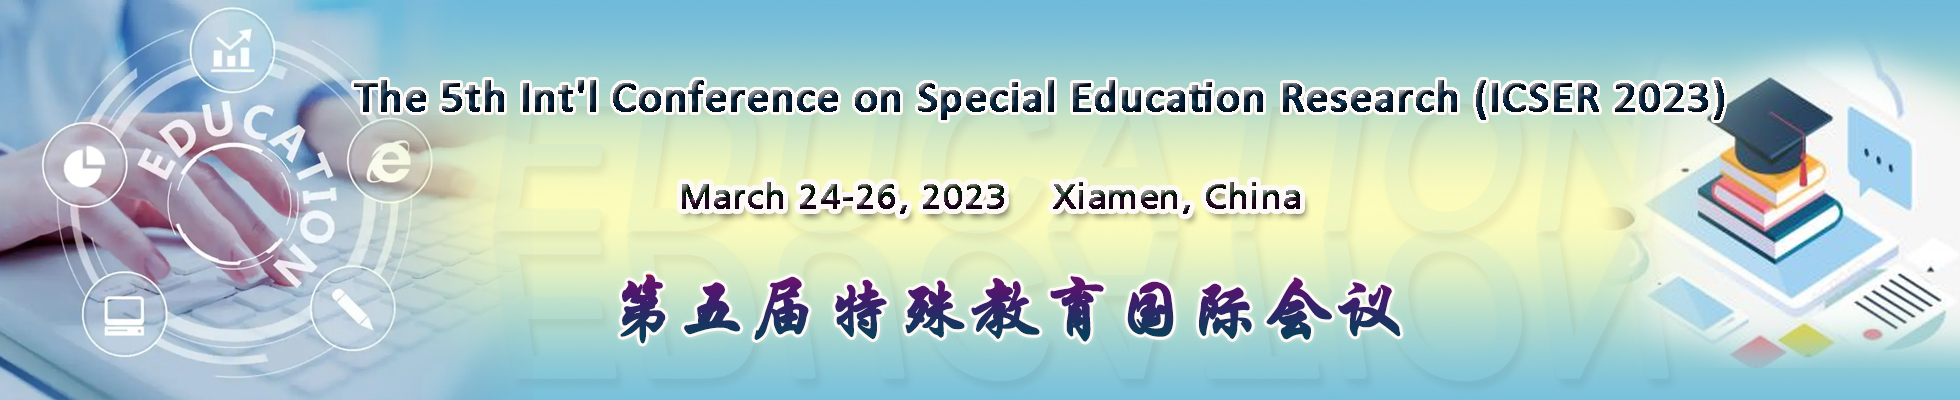 The 5th Int'l Conference on Special Education Research (ICSER 2023), Xiamen, Fujian, China